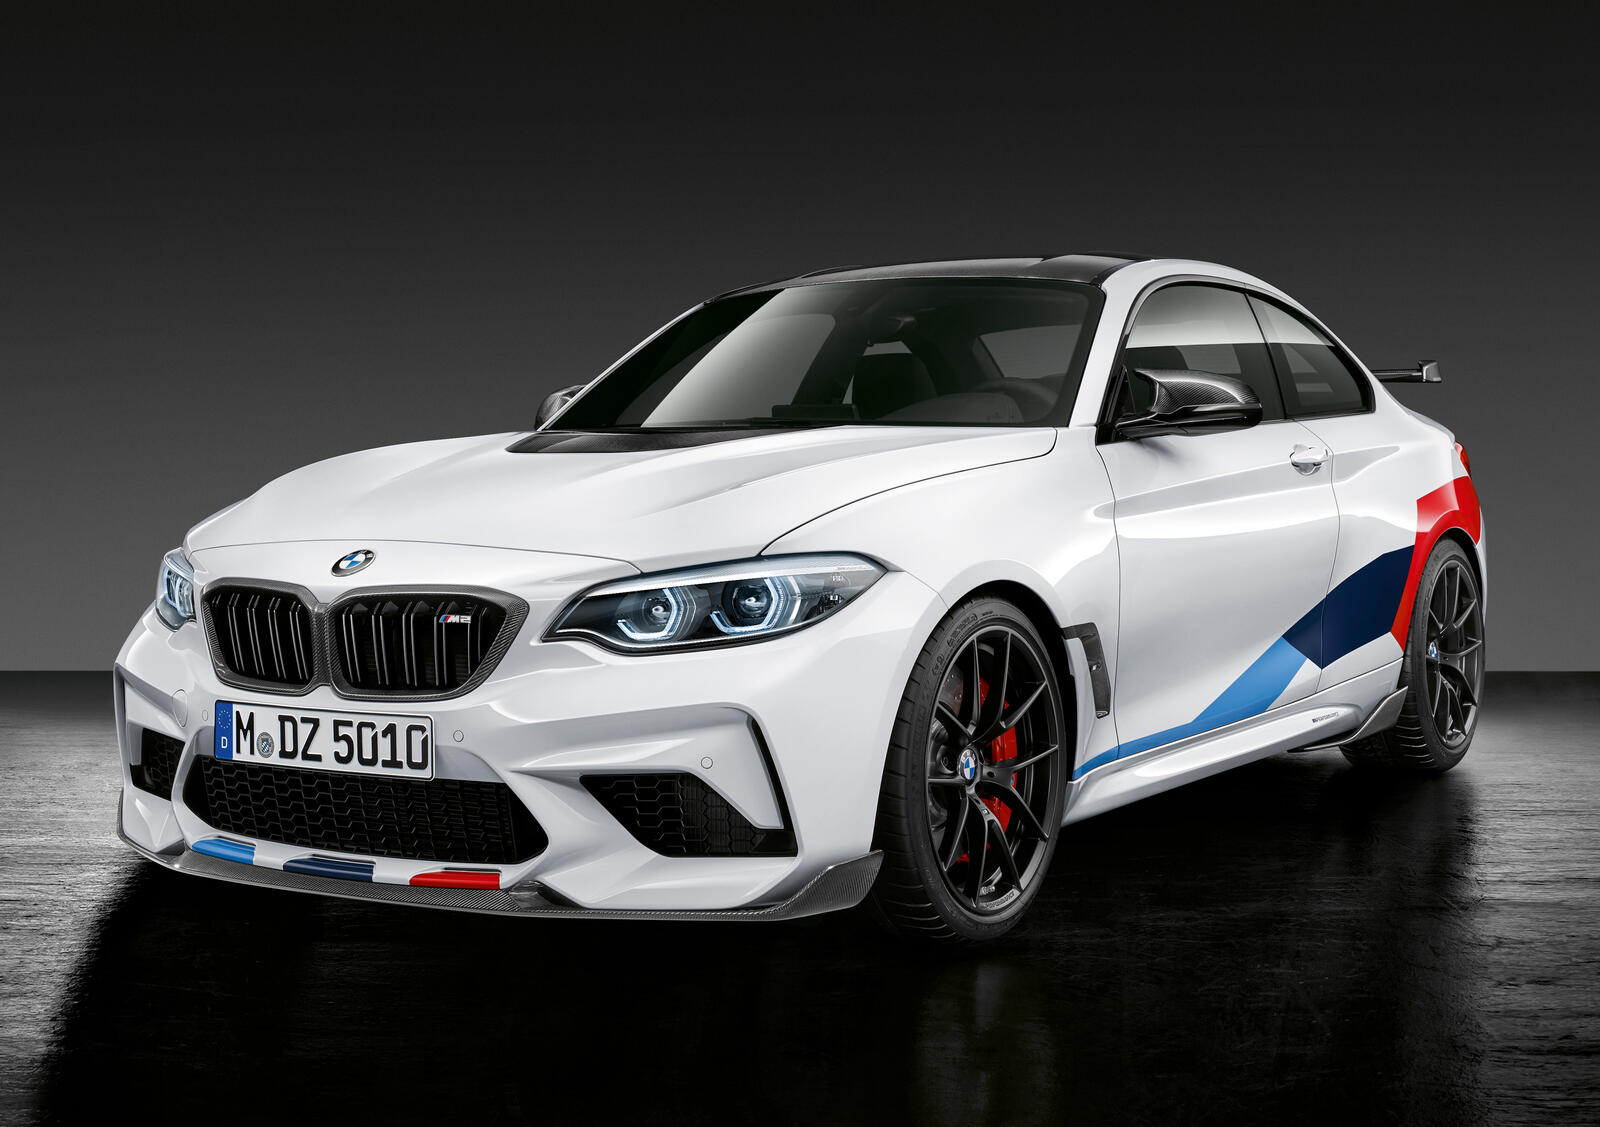 Wallpapers Bmw M2 Bmw 2018 cars on the desktop